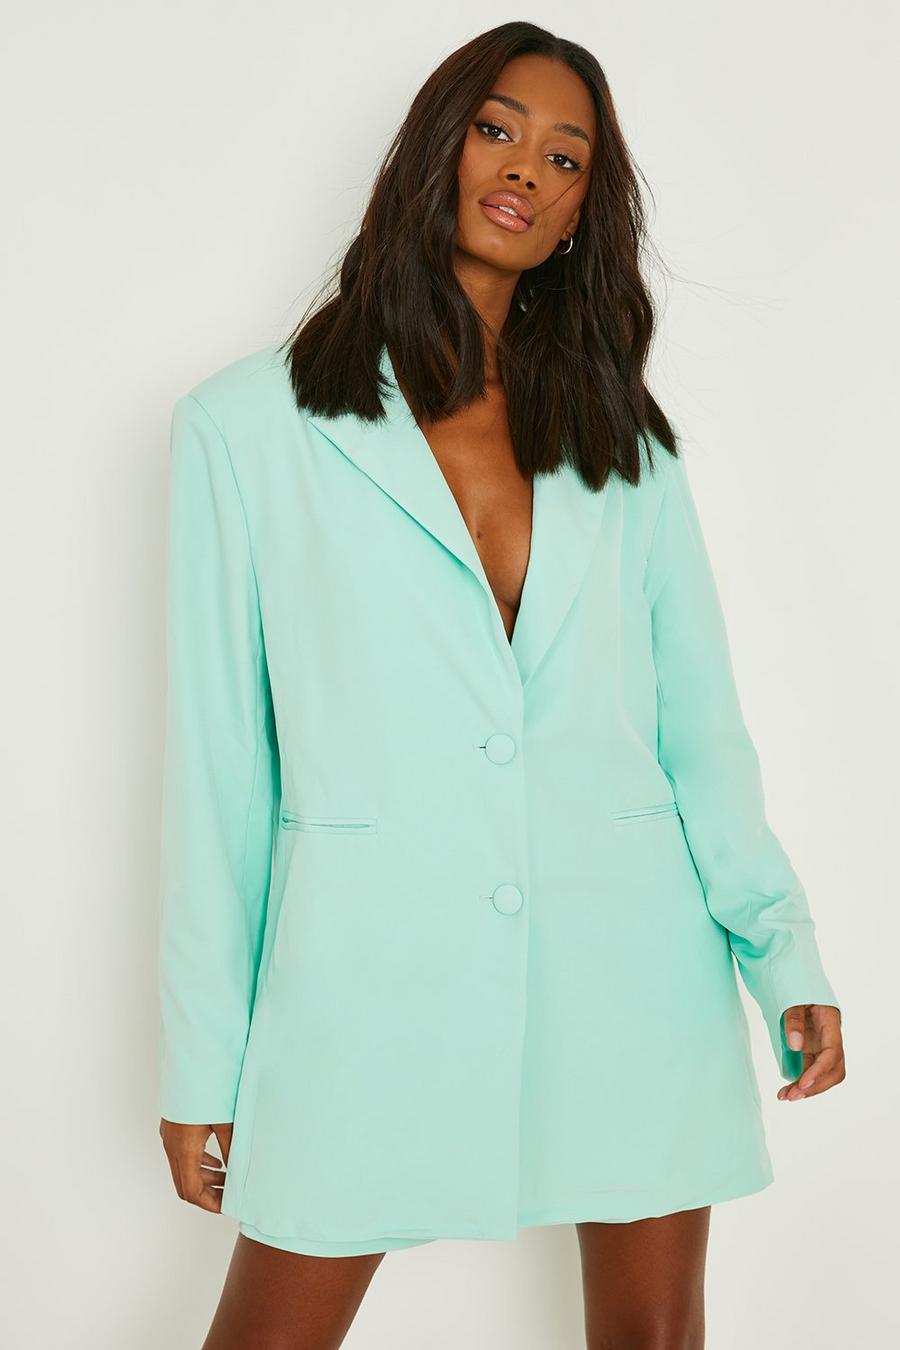 Pant Suits for Wedding Guests, Dressy Pant Suits for Wedding Guests